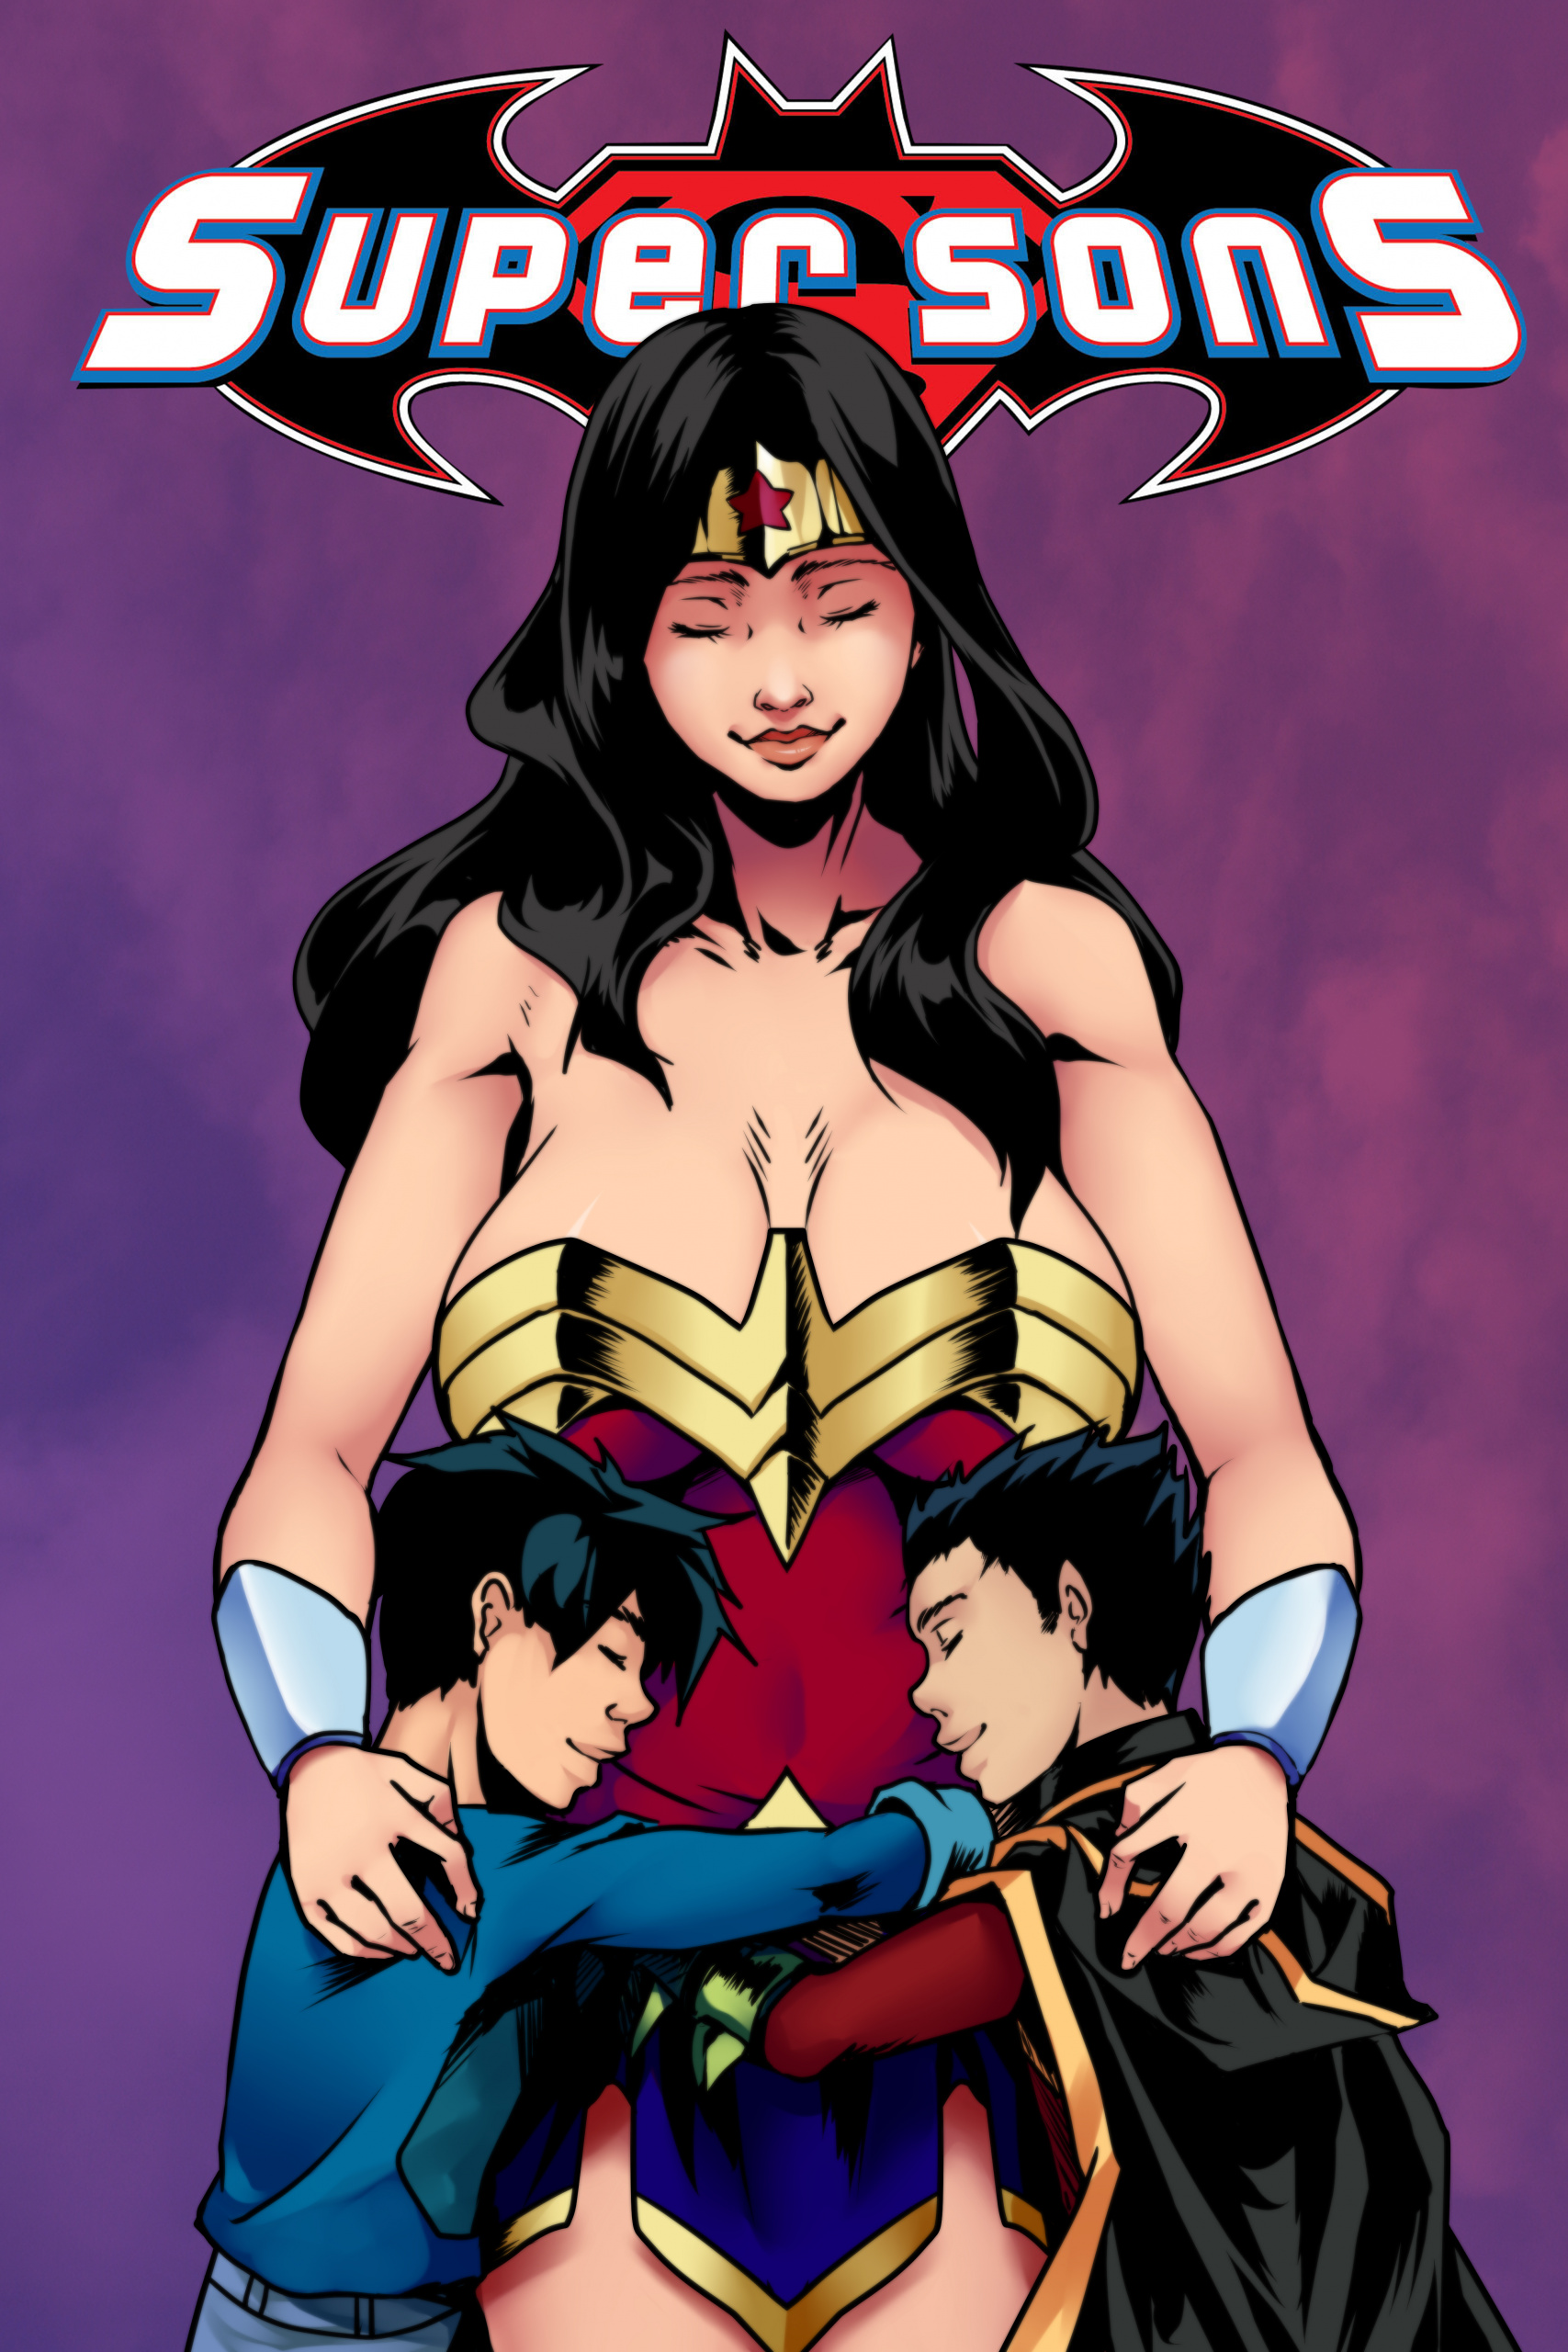 Super Sons 2 porn comics Oral sex, Anal Sex, BDSM, Big Tits, Blowjob, Bondage, Creampie, Deepthroat, Domination, Double Penetration, Group Sex, Straight, Straight Shota, Submission, Threesome, X-Ray